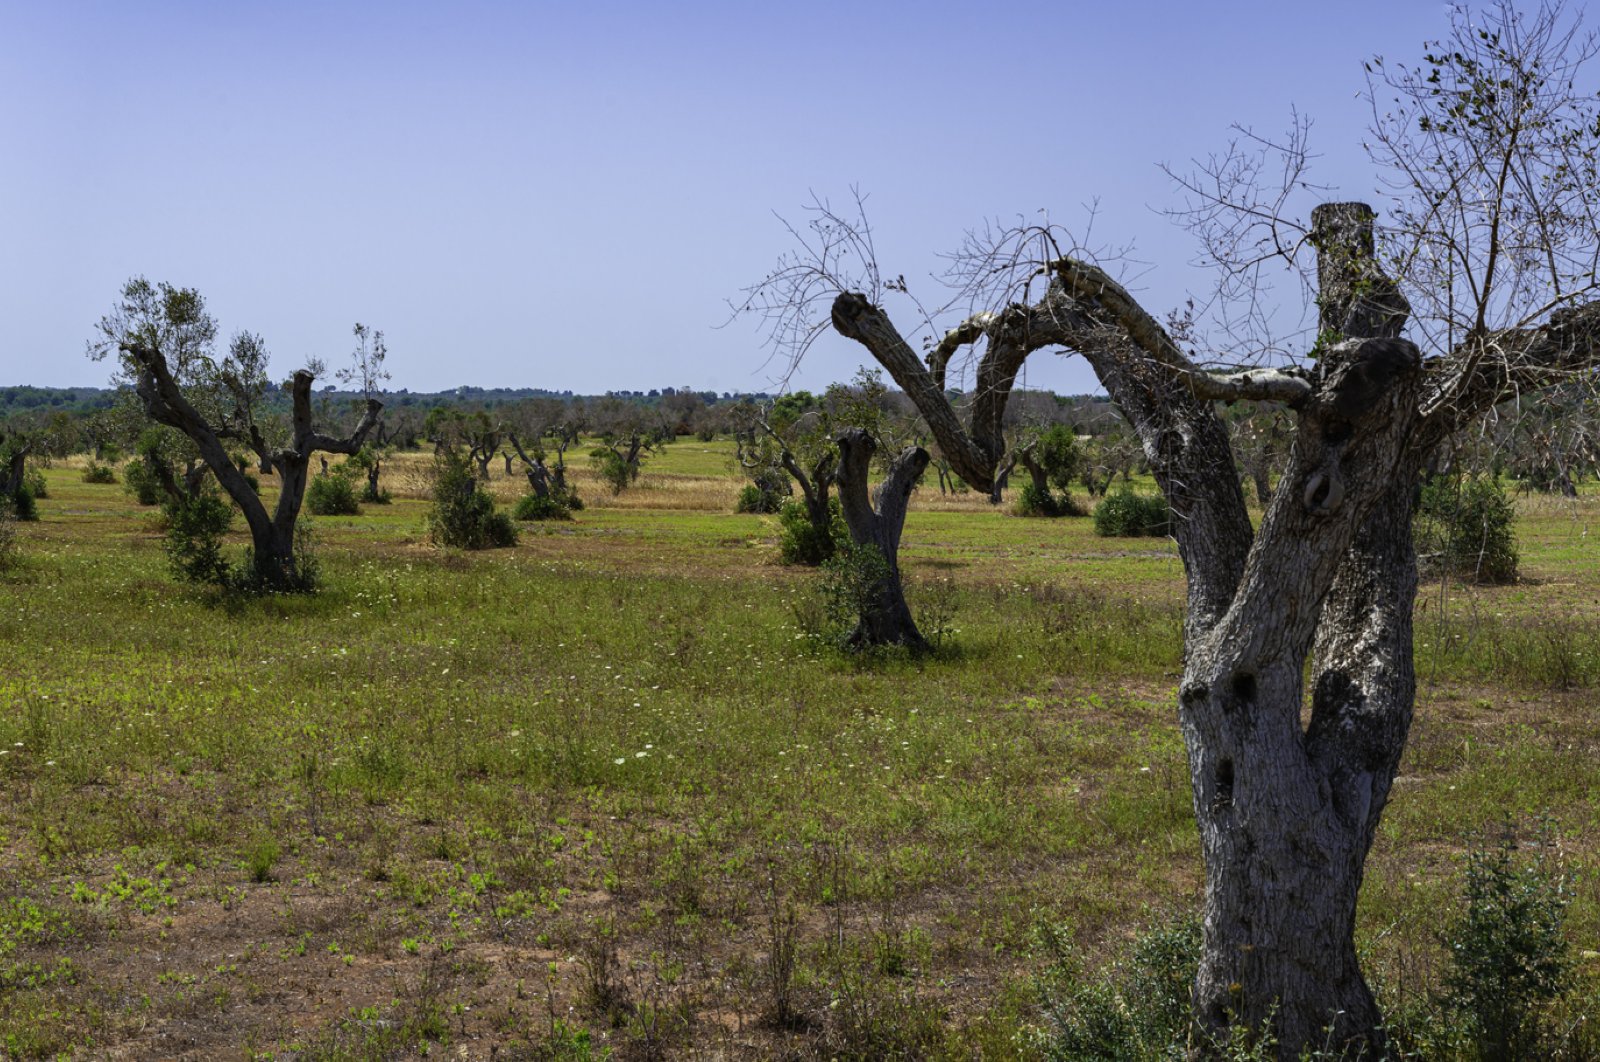 Xylella-infested olive trees in Salento, South Italy. (iStock Photo)